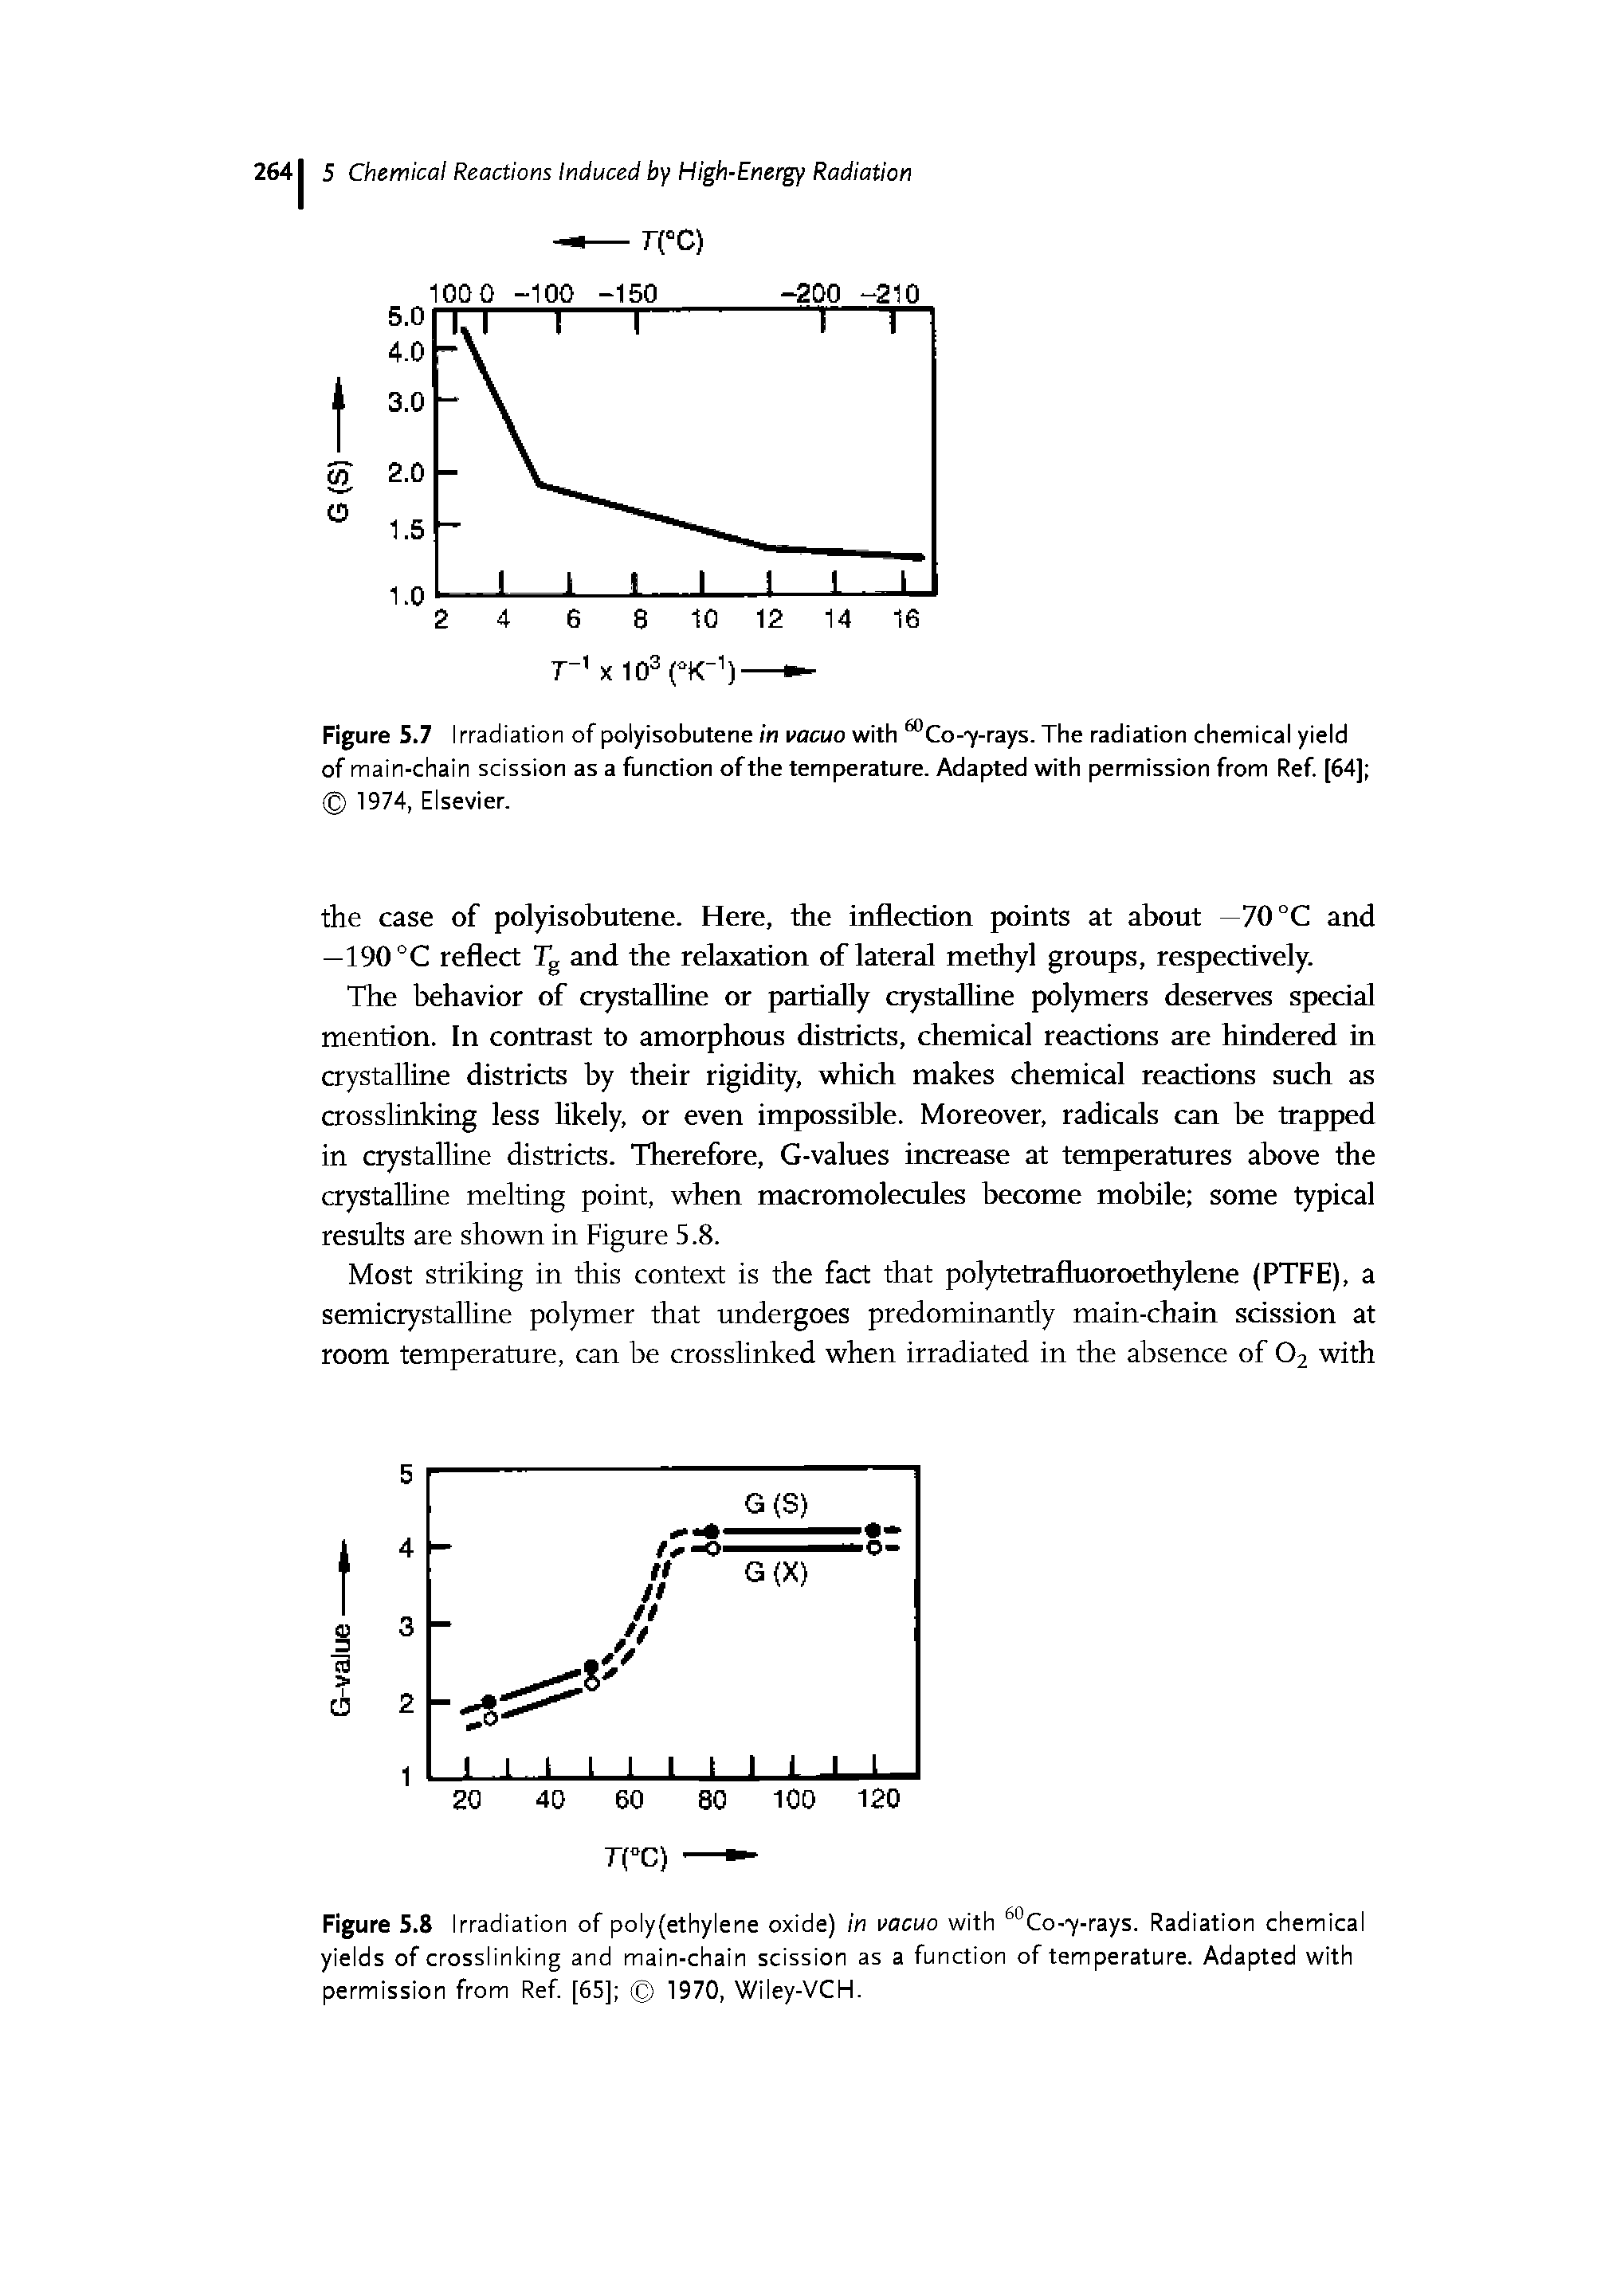 Figure 5.8 Irradiation of poly(ethylene oxide) in vacuo with Co-y-rays. Radiation chemical yields of crosslinking and main-chain scission as a function of temperature. Adapted with permission from Ref [65] 1970, Wiley-VCH.